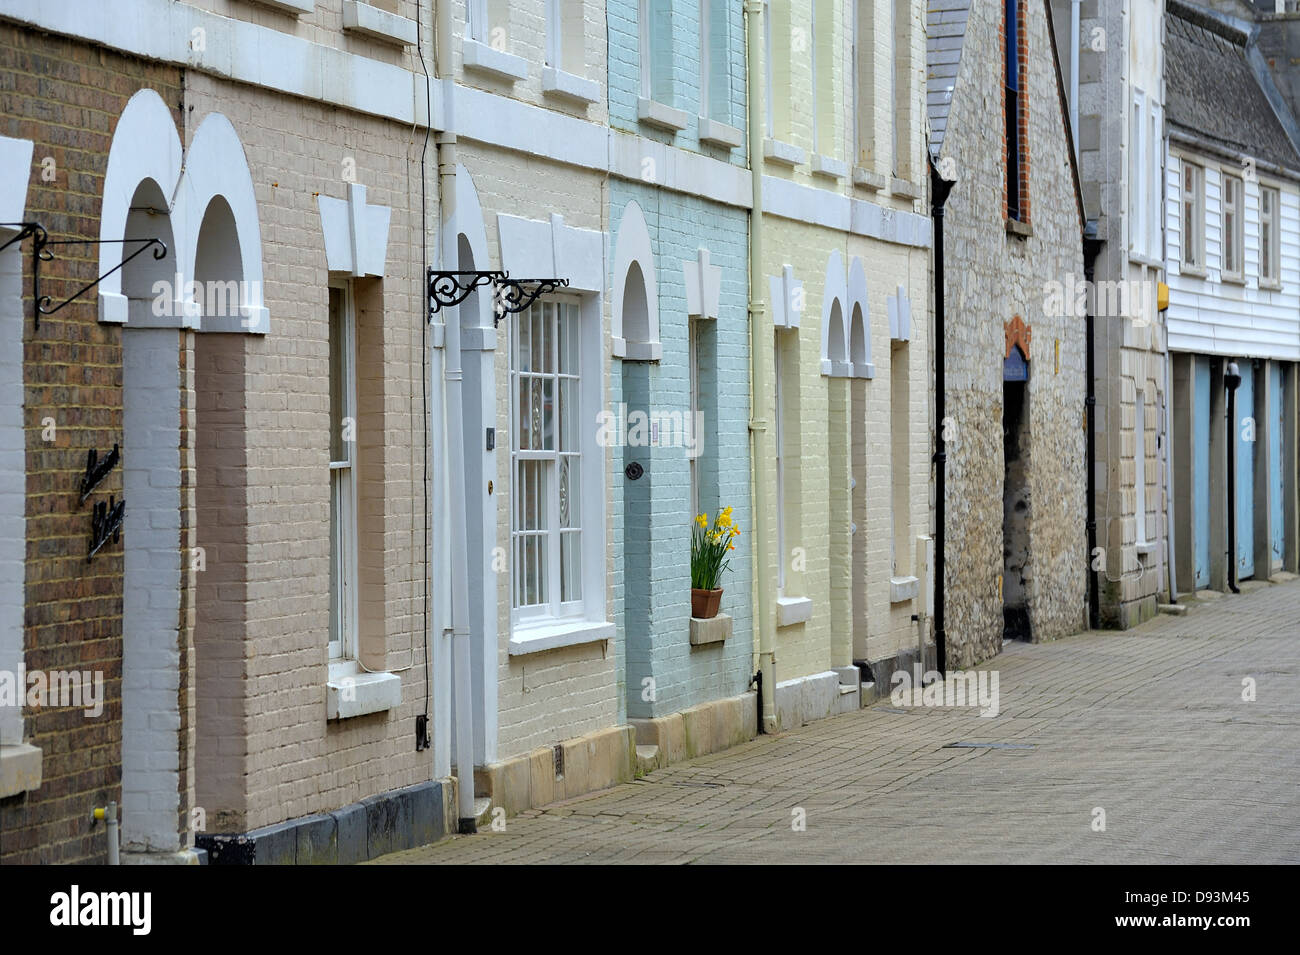 Row of pastel colored terraced houses Weymouth Dorset England uk Stock Photo